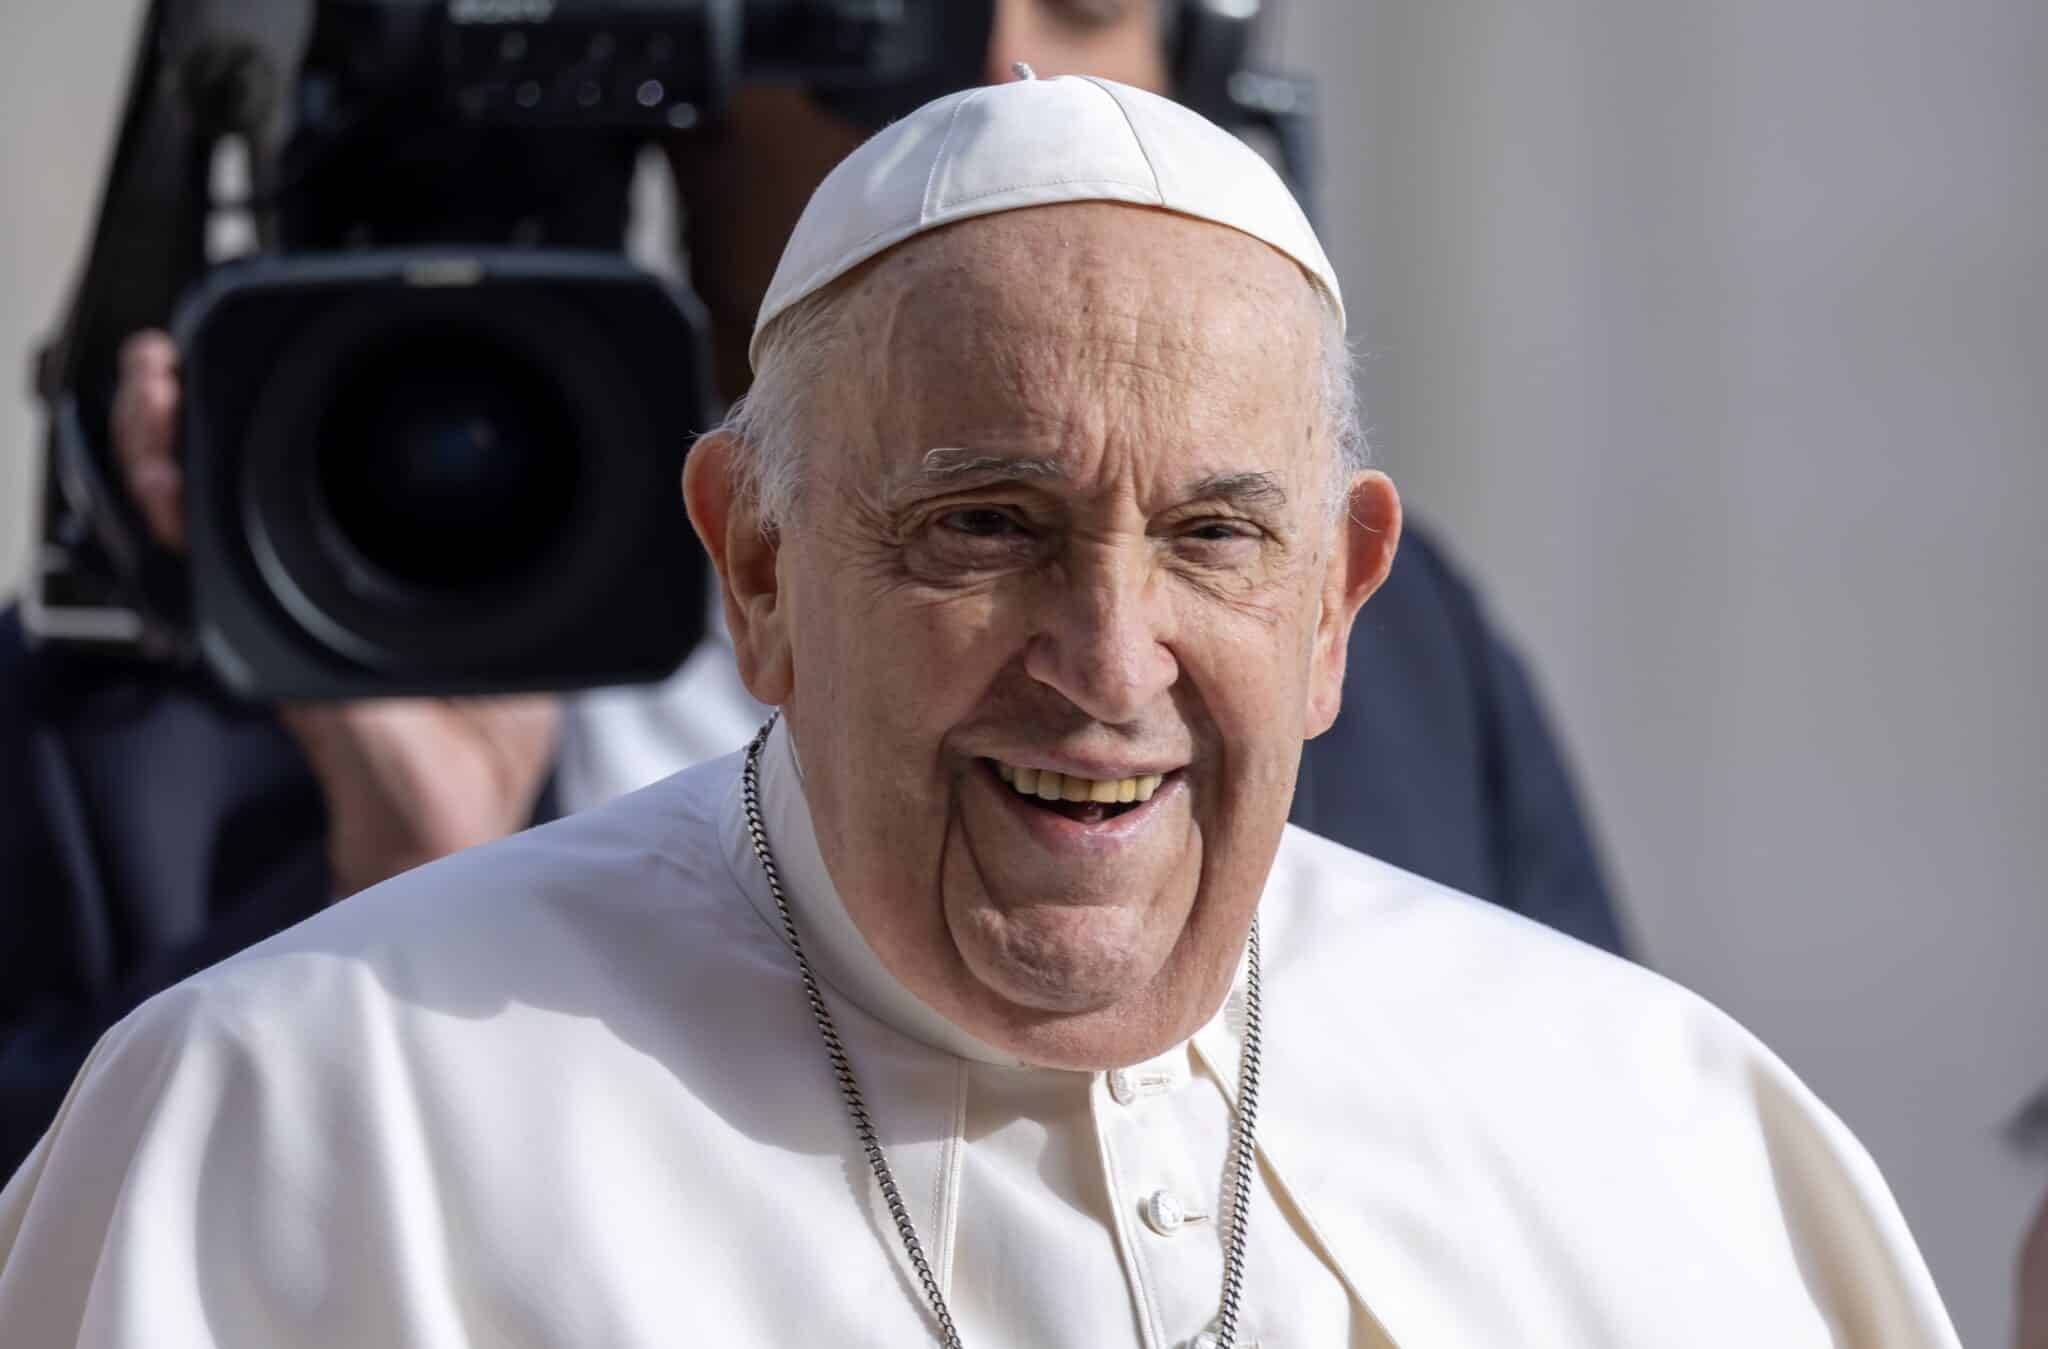 Pope Francis is planning to make the longest trip of his papacy in September, visiting Indonesia, Papua New Guinea, Timor-Leste and Singapore, the Vatican press office announced.